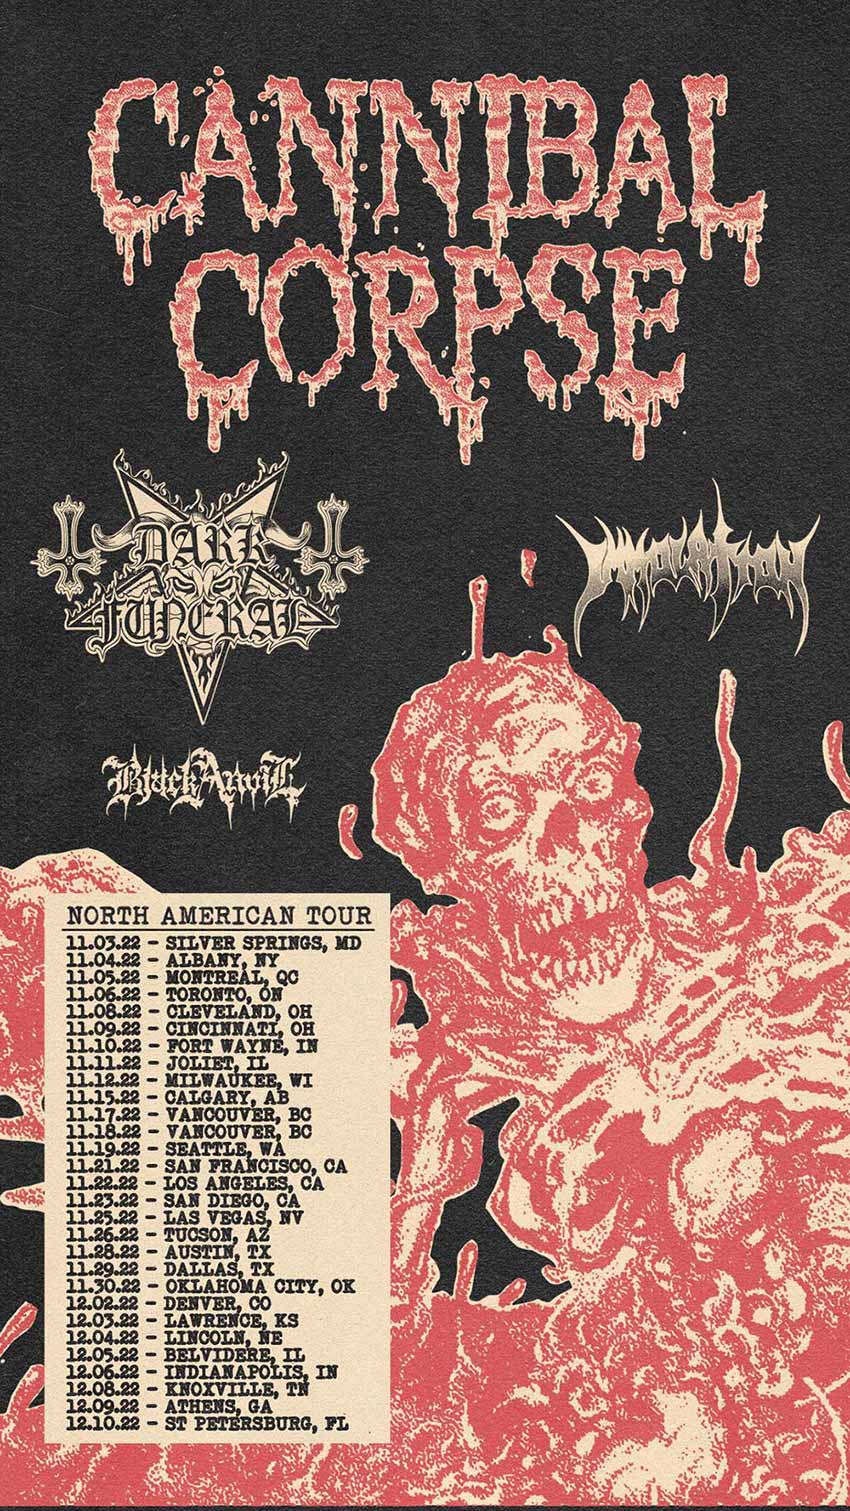 Cannibal Corpse tour dates for late 2022